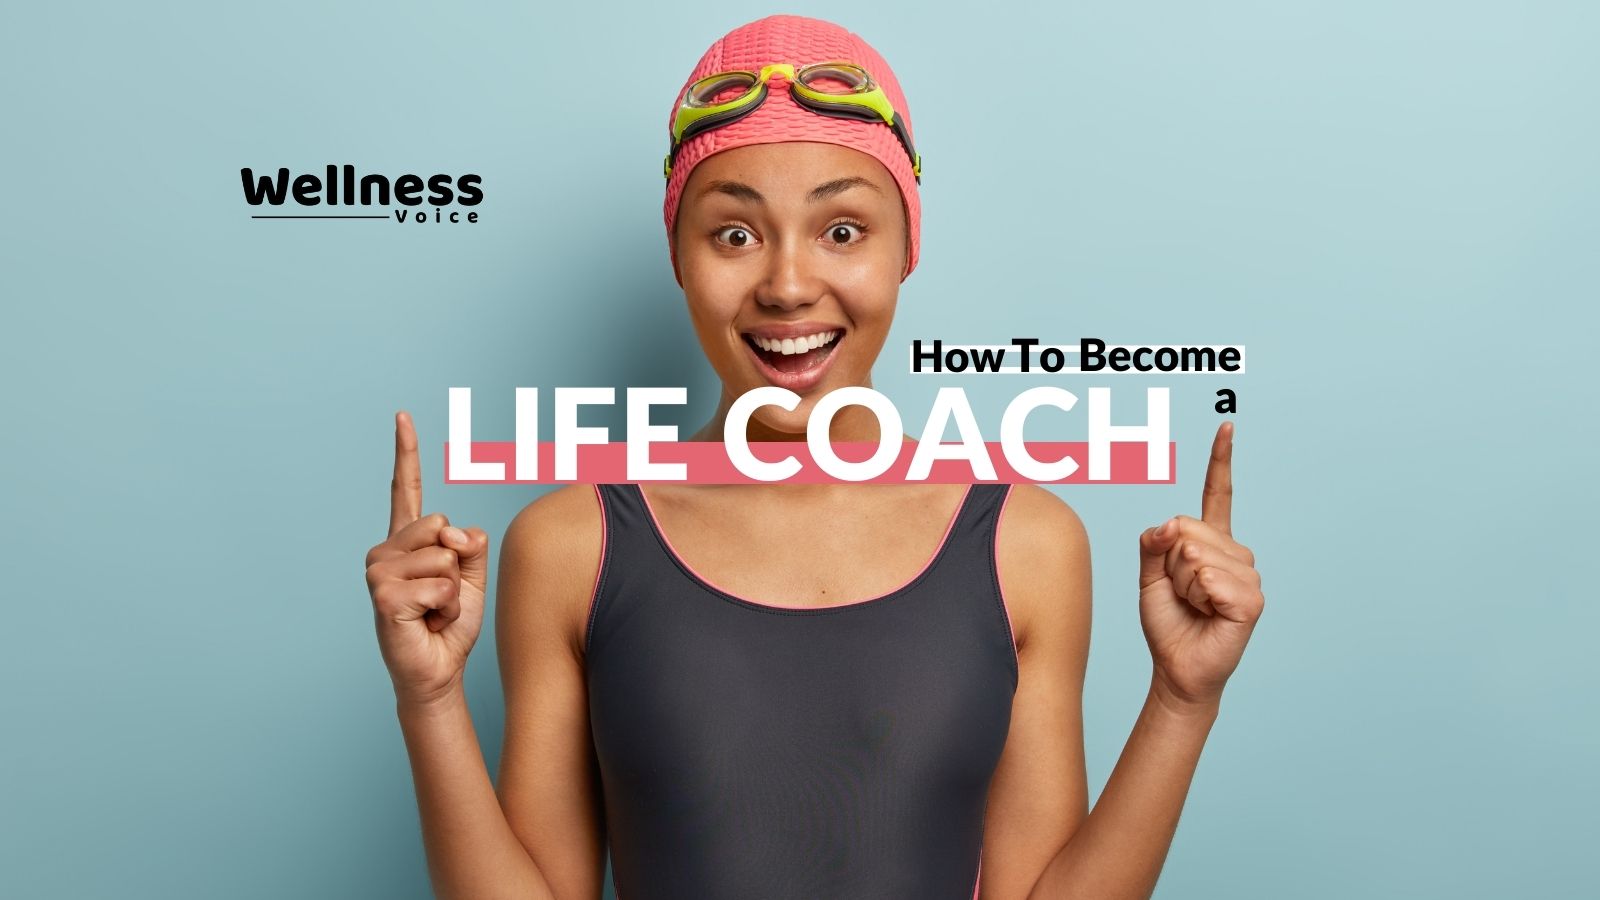 How To Become a Life Coach